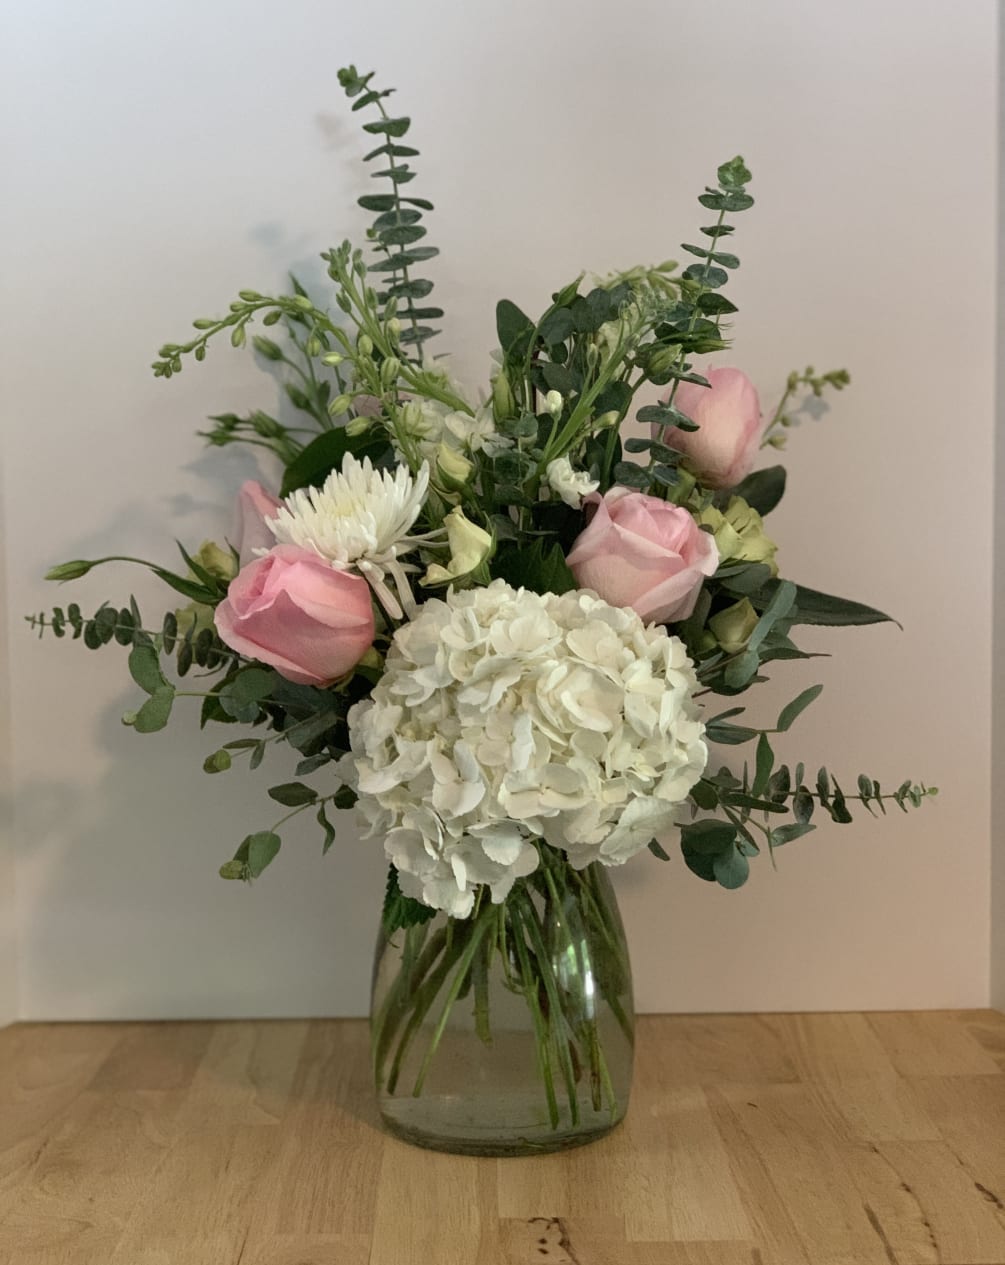 This fun bouquet contains white hydrangea, pink roses, larkspur and euchalyptus. Perfect